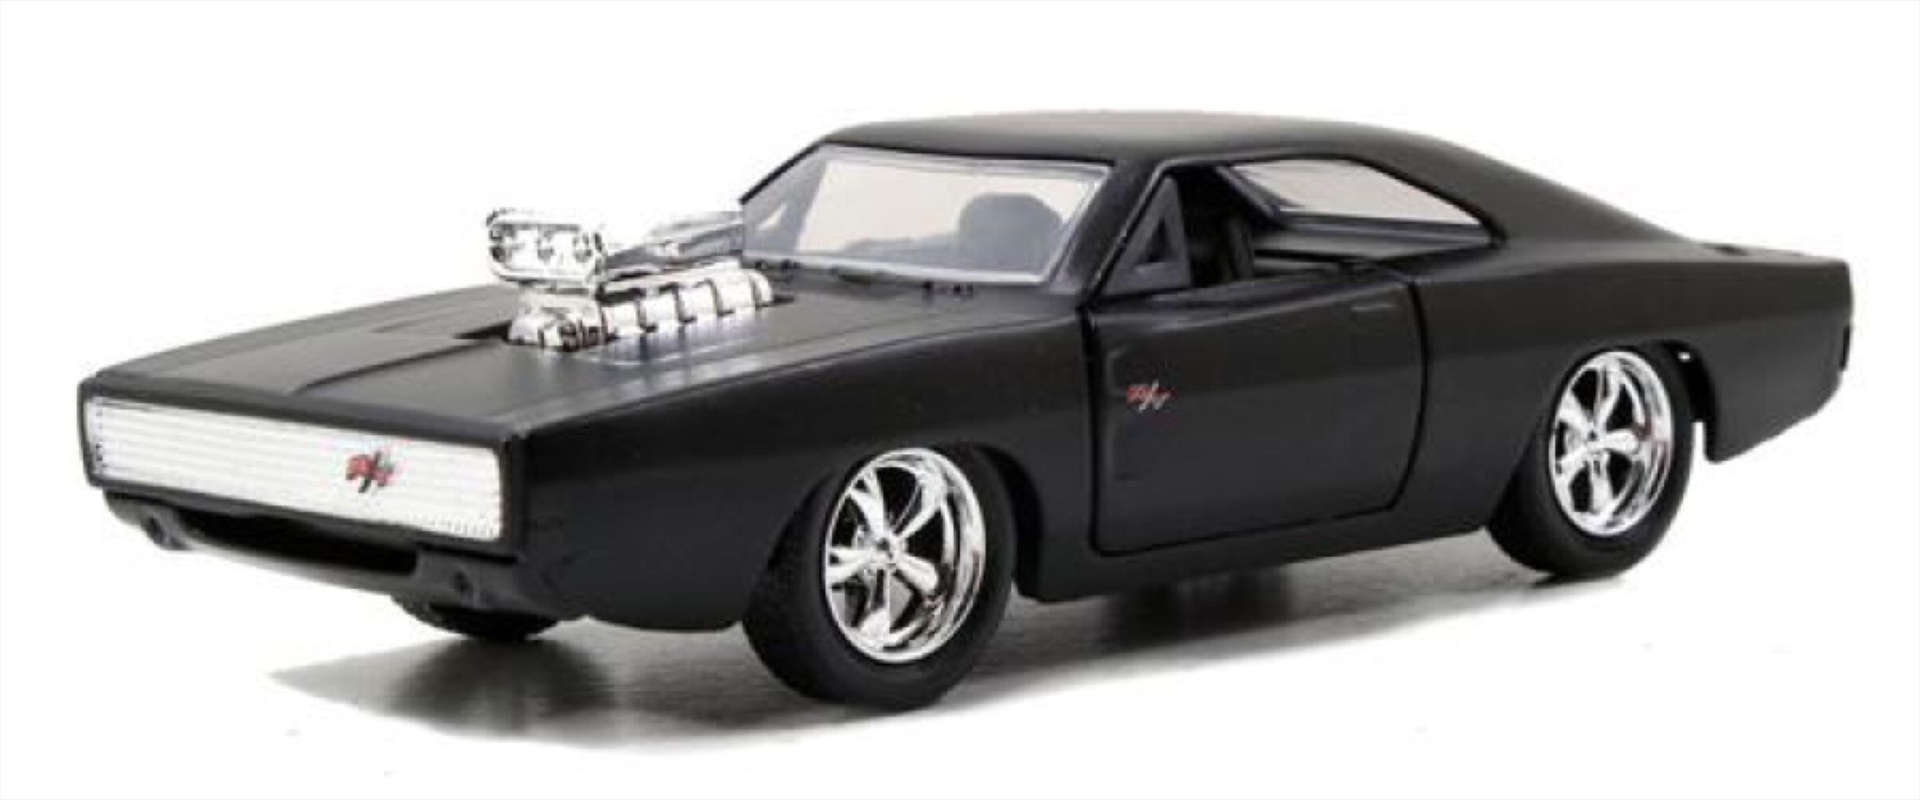 Fast and Furious - 1970 Dodge Charger Street 1:32 Scale Hollywood Ride | Merchandise